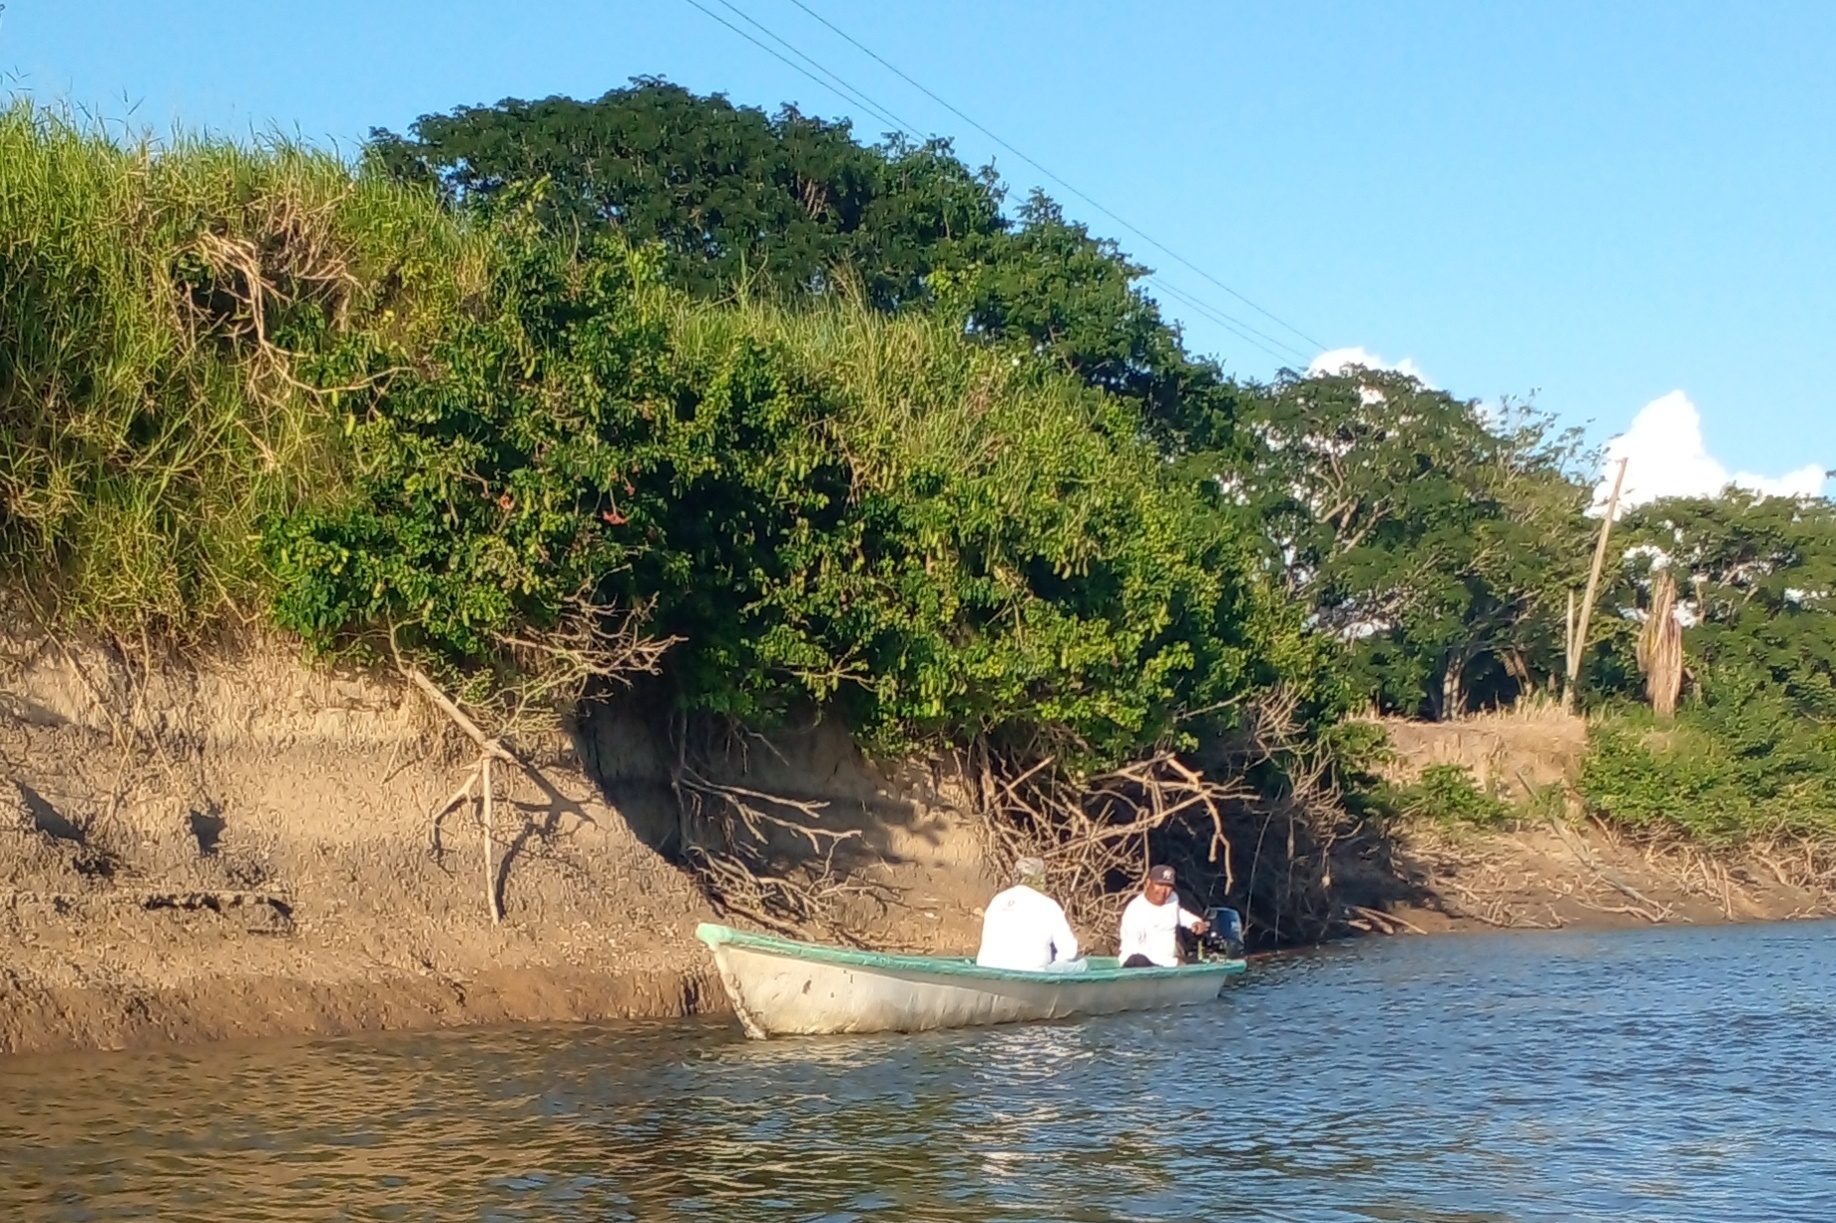 Community people in a boat on usumacinta river